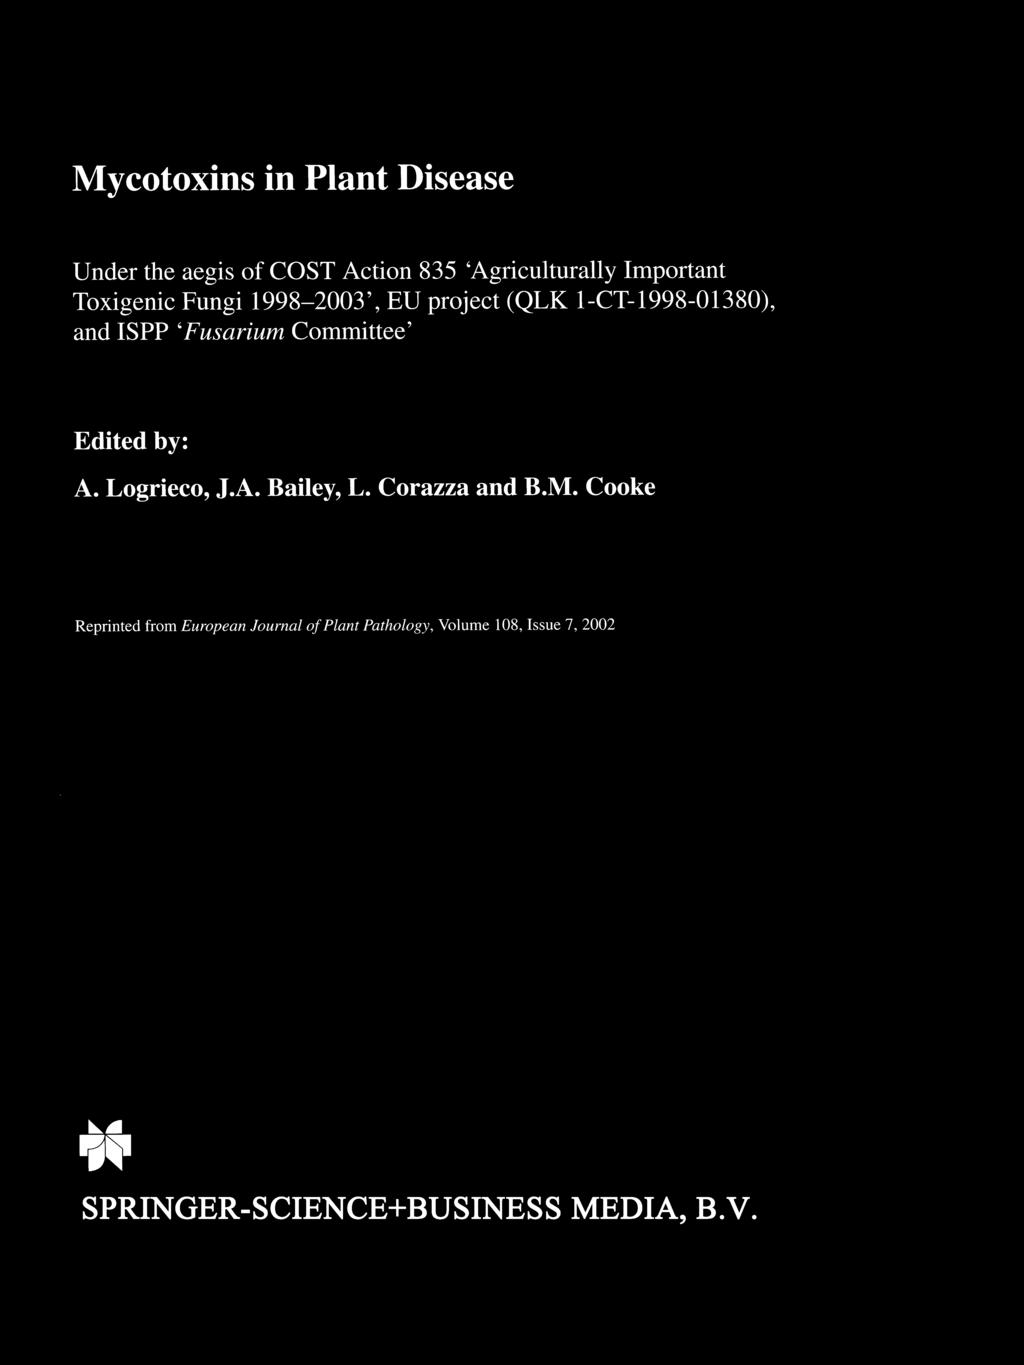 Mycotoxins in Plant Disease Under the aegis of COST Action 835 'Agricu1turally Important Toxigenic Fungi 1998-2003', EU project (QLK 1-CT-1998-01380), and ISPP 'Fusarium Committee'